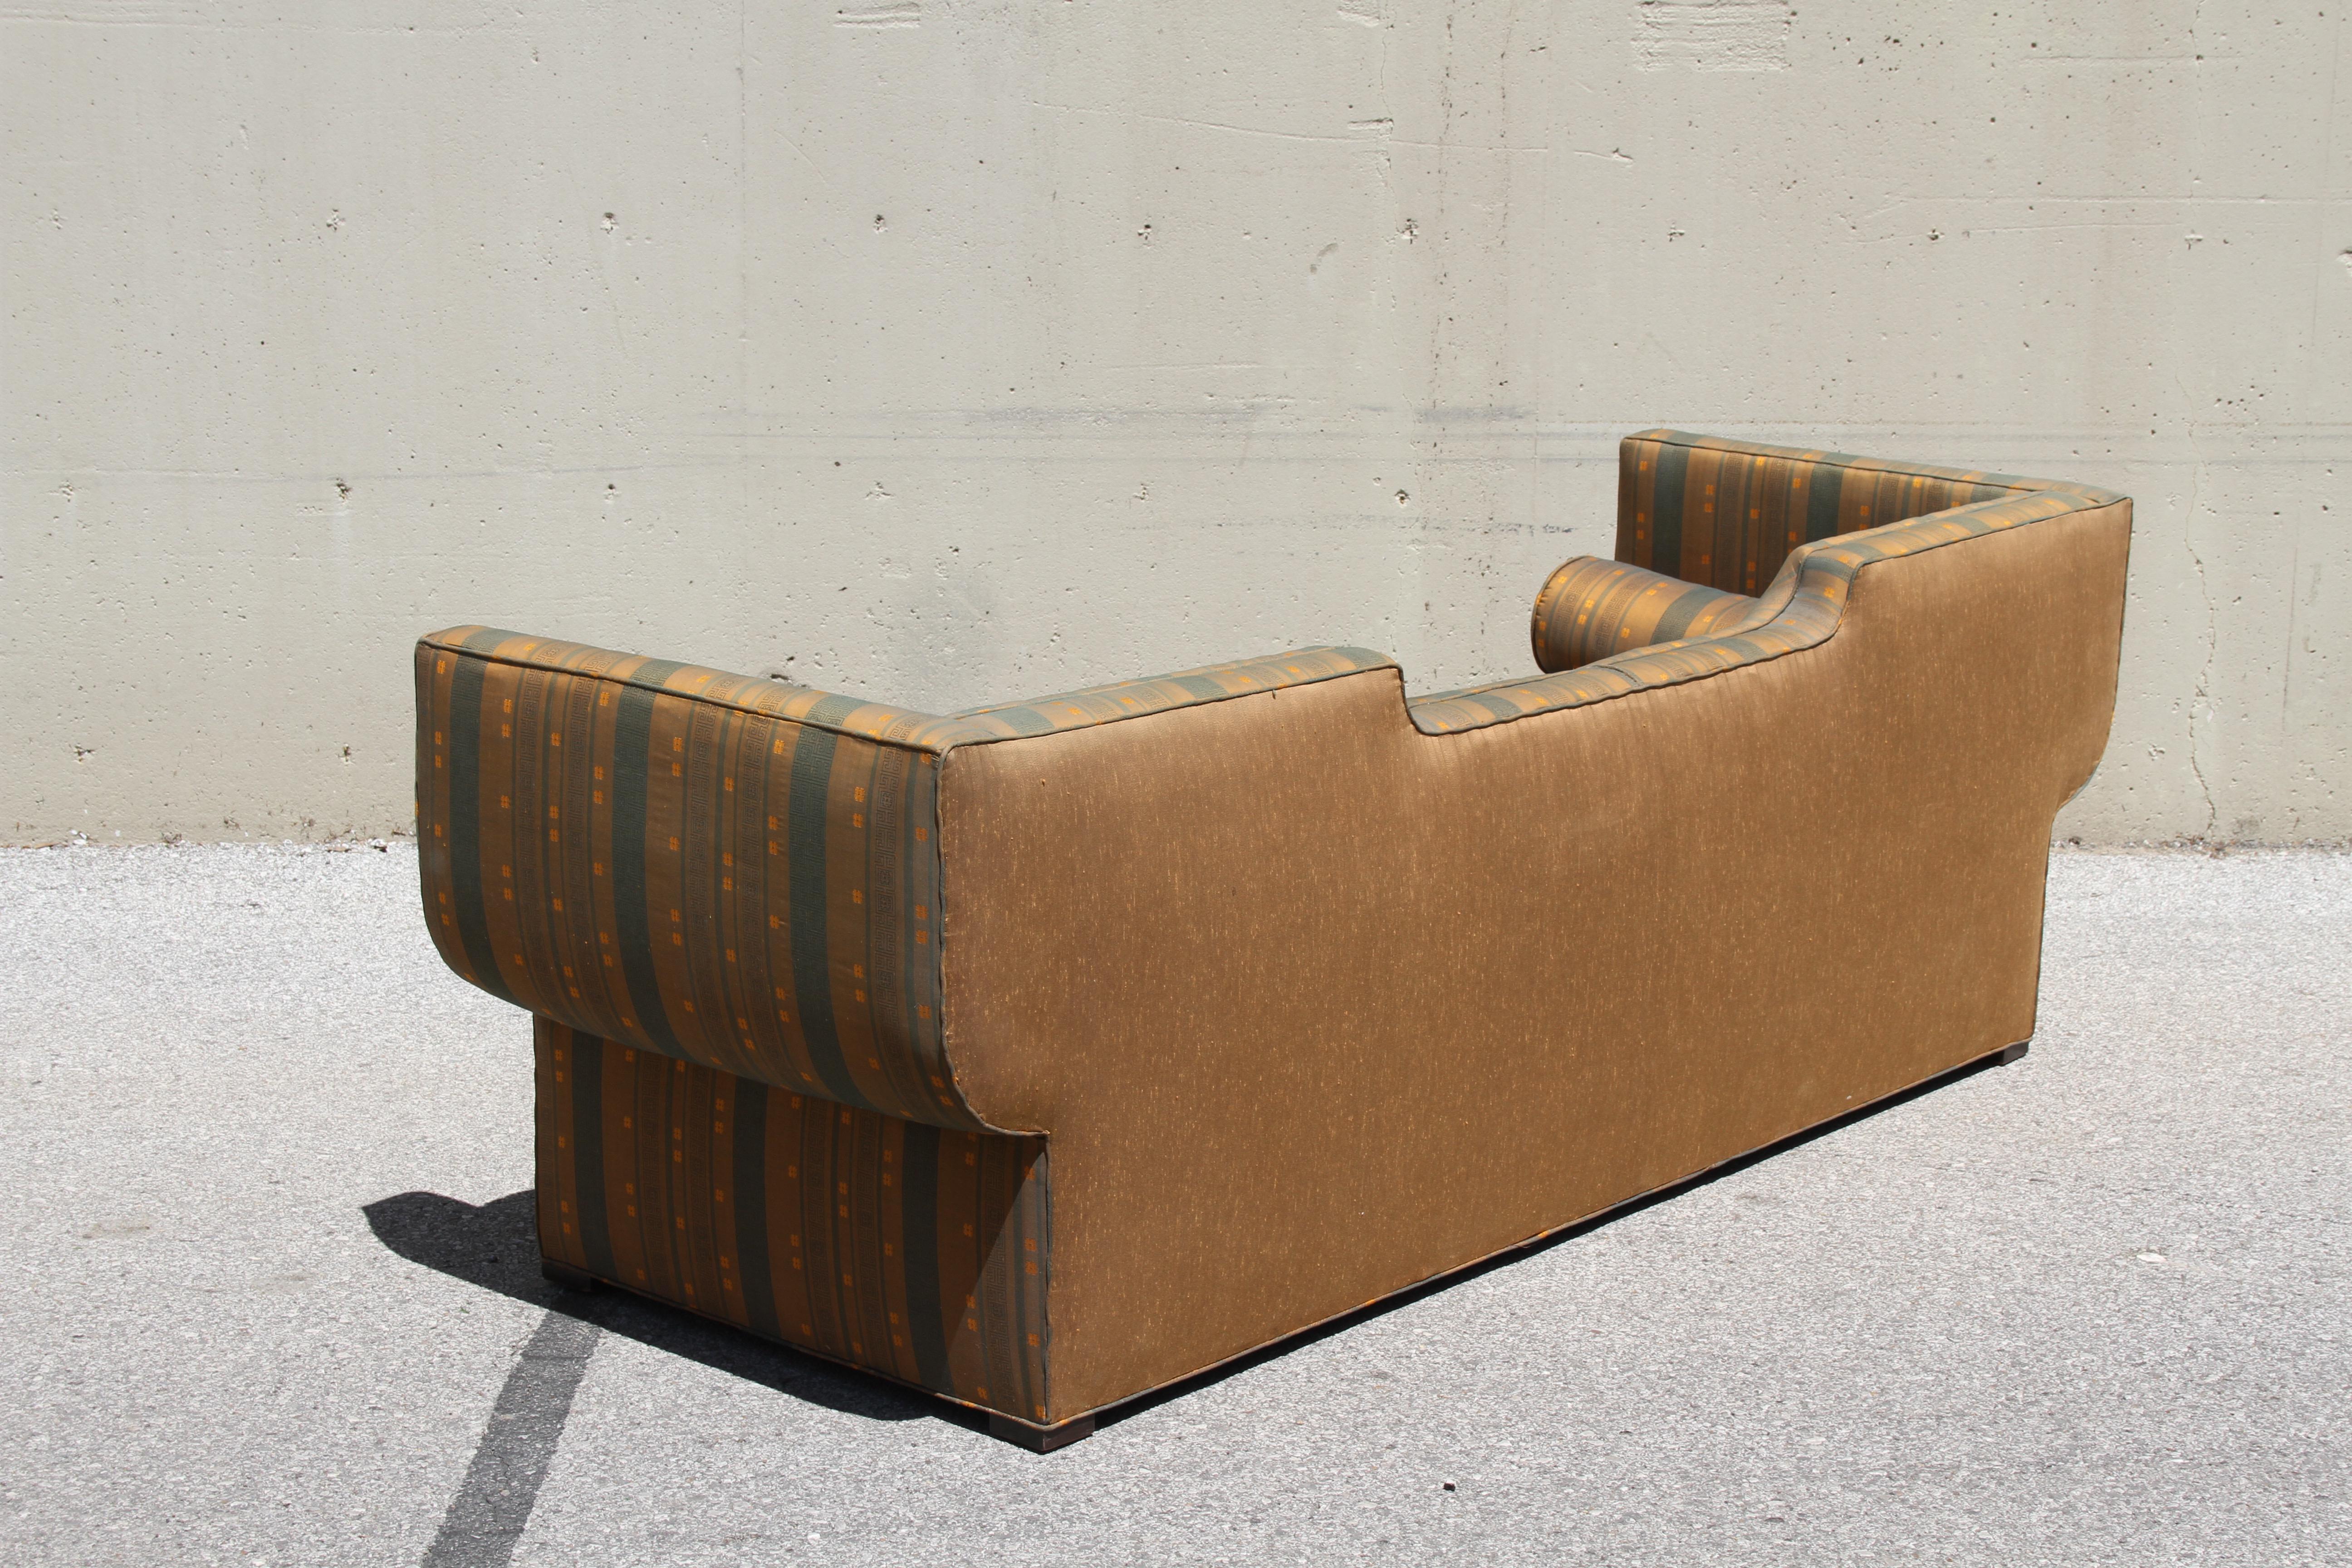 Rare Baker Furniture Co. Gondola Sofa, Midcentury In Good Condition For Sale In St. Louis, MO